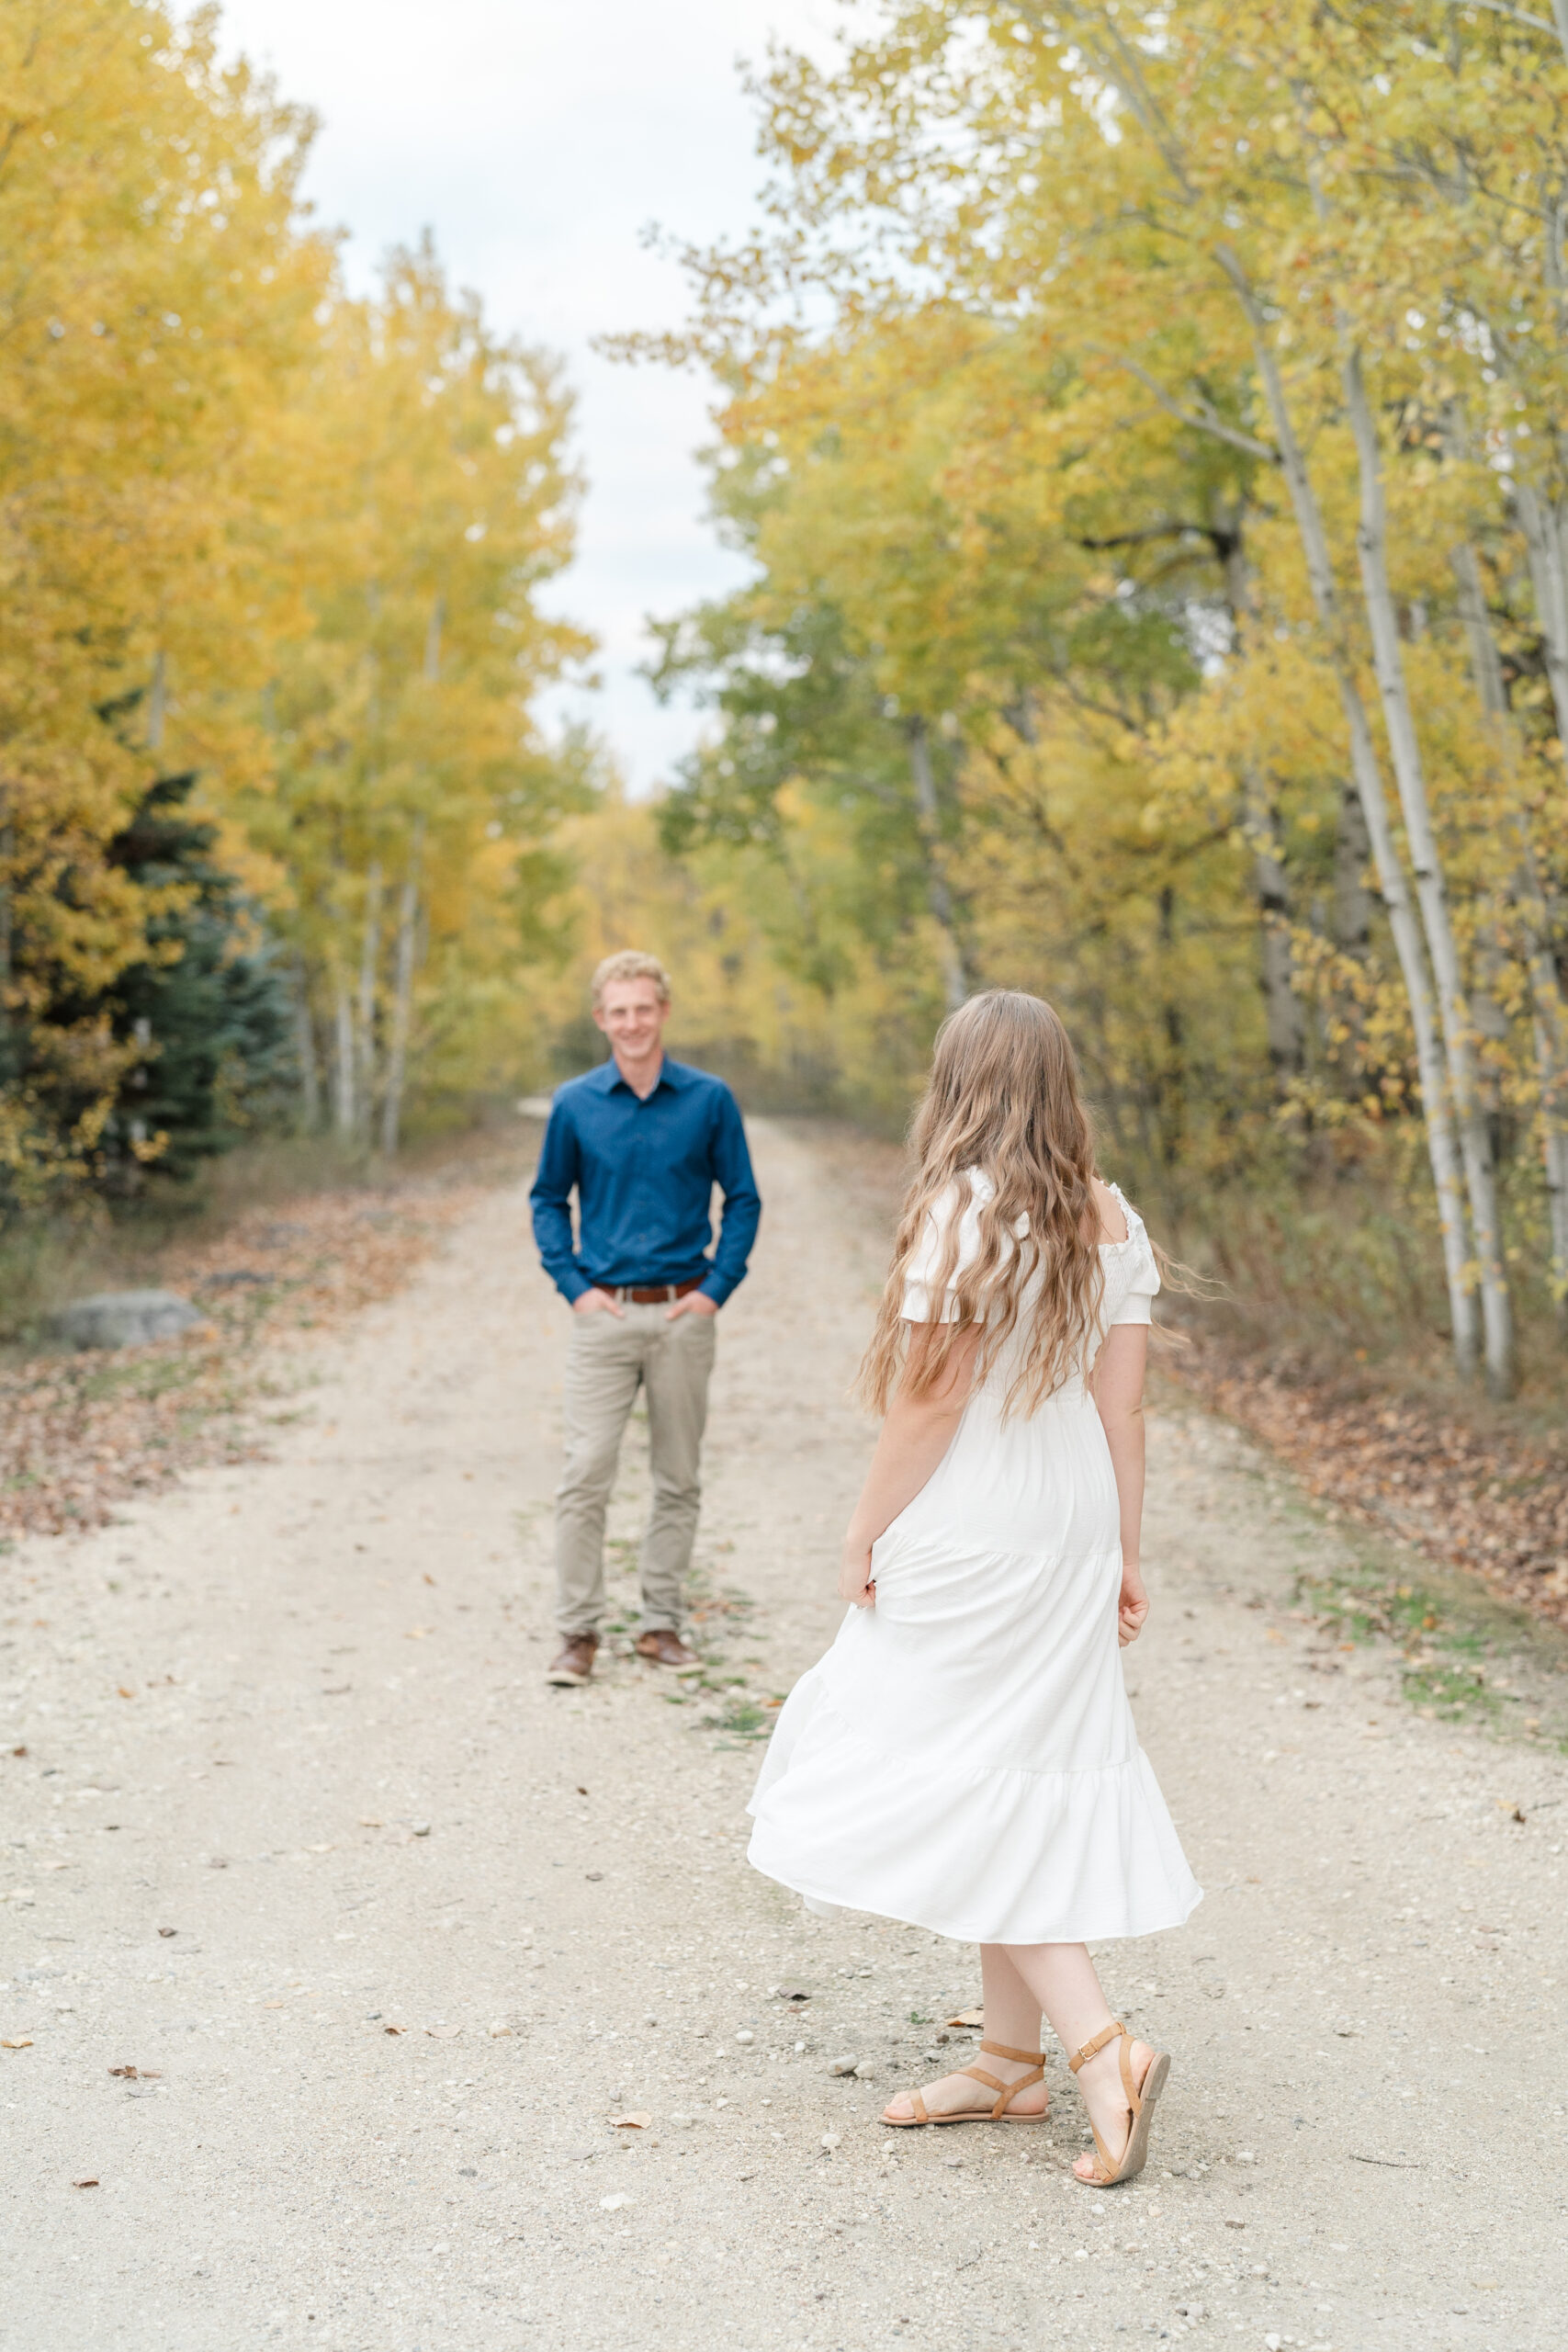 Manitoba couple in a forest